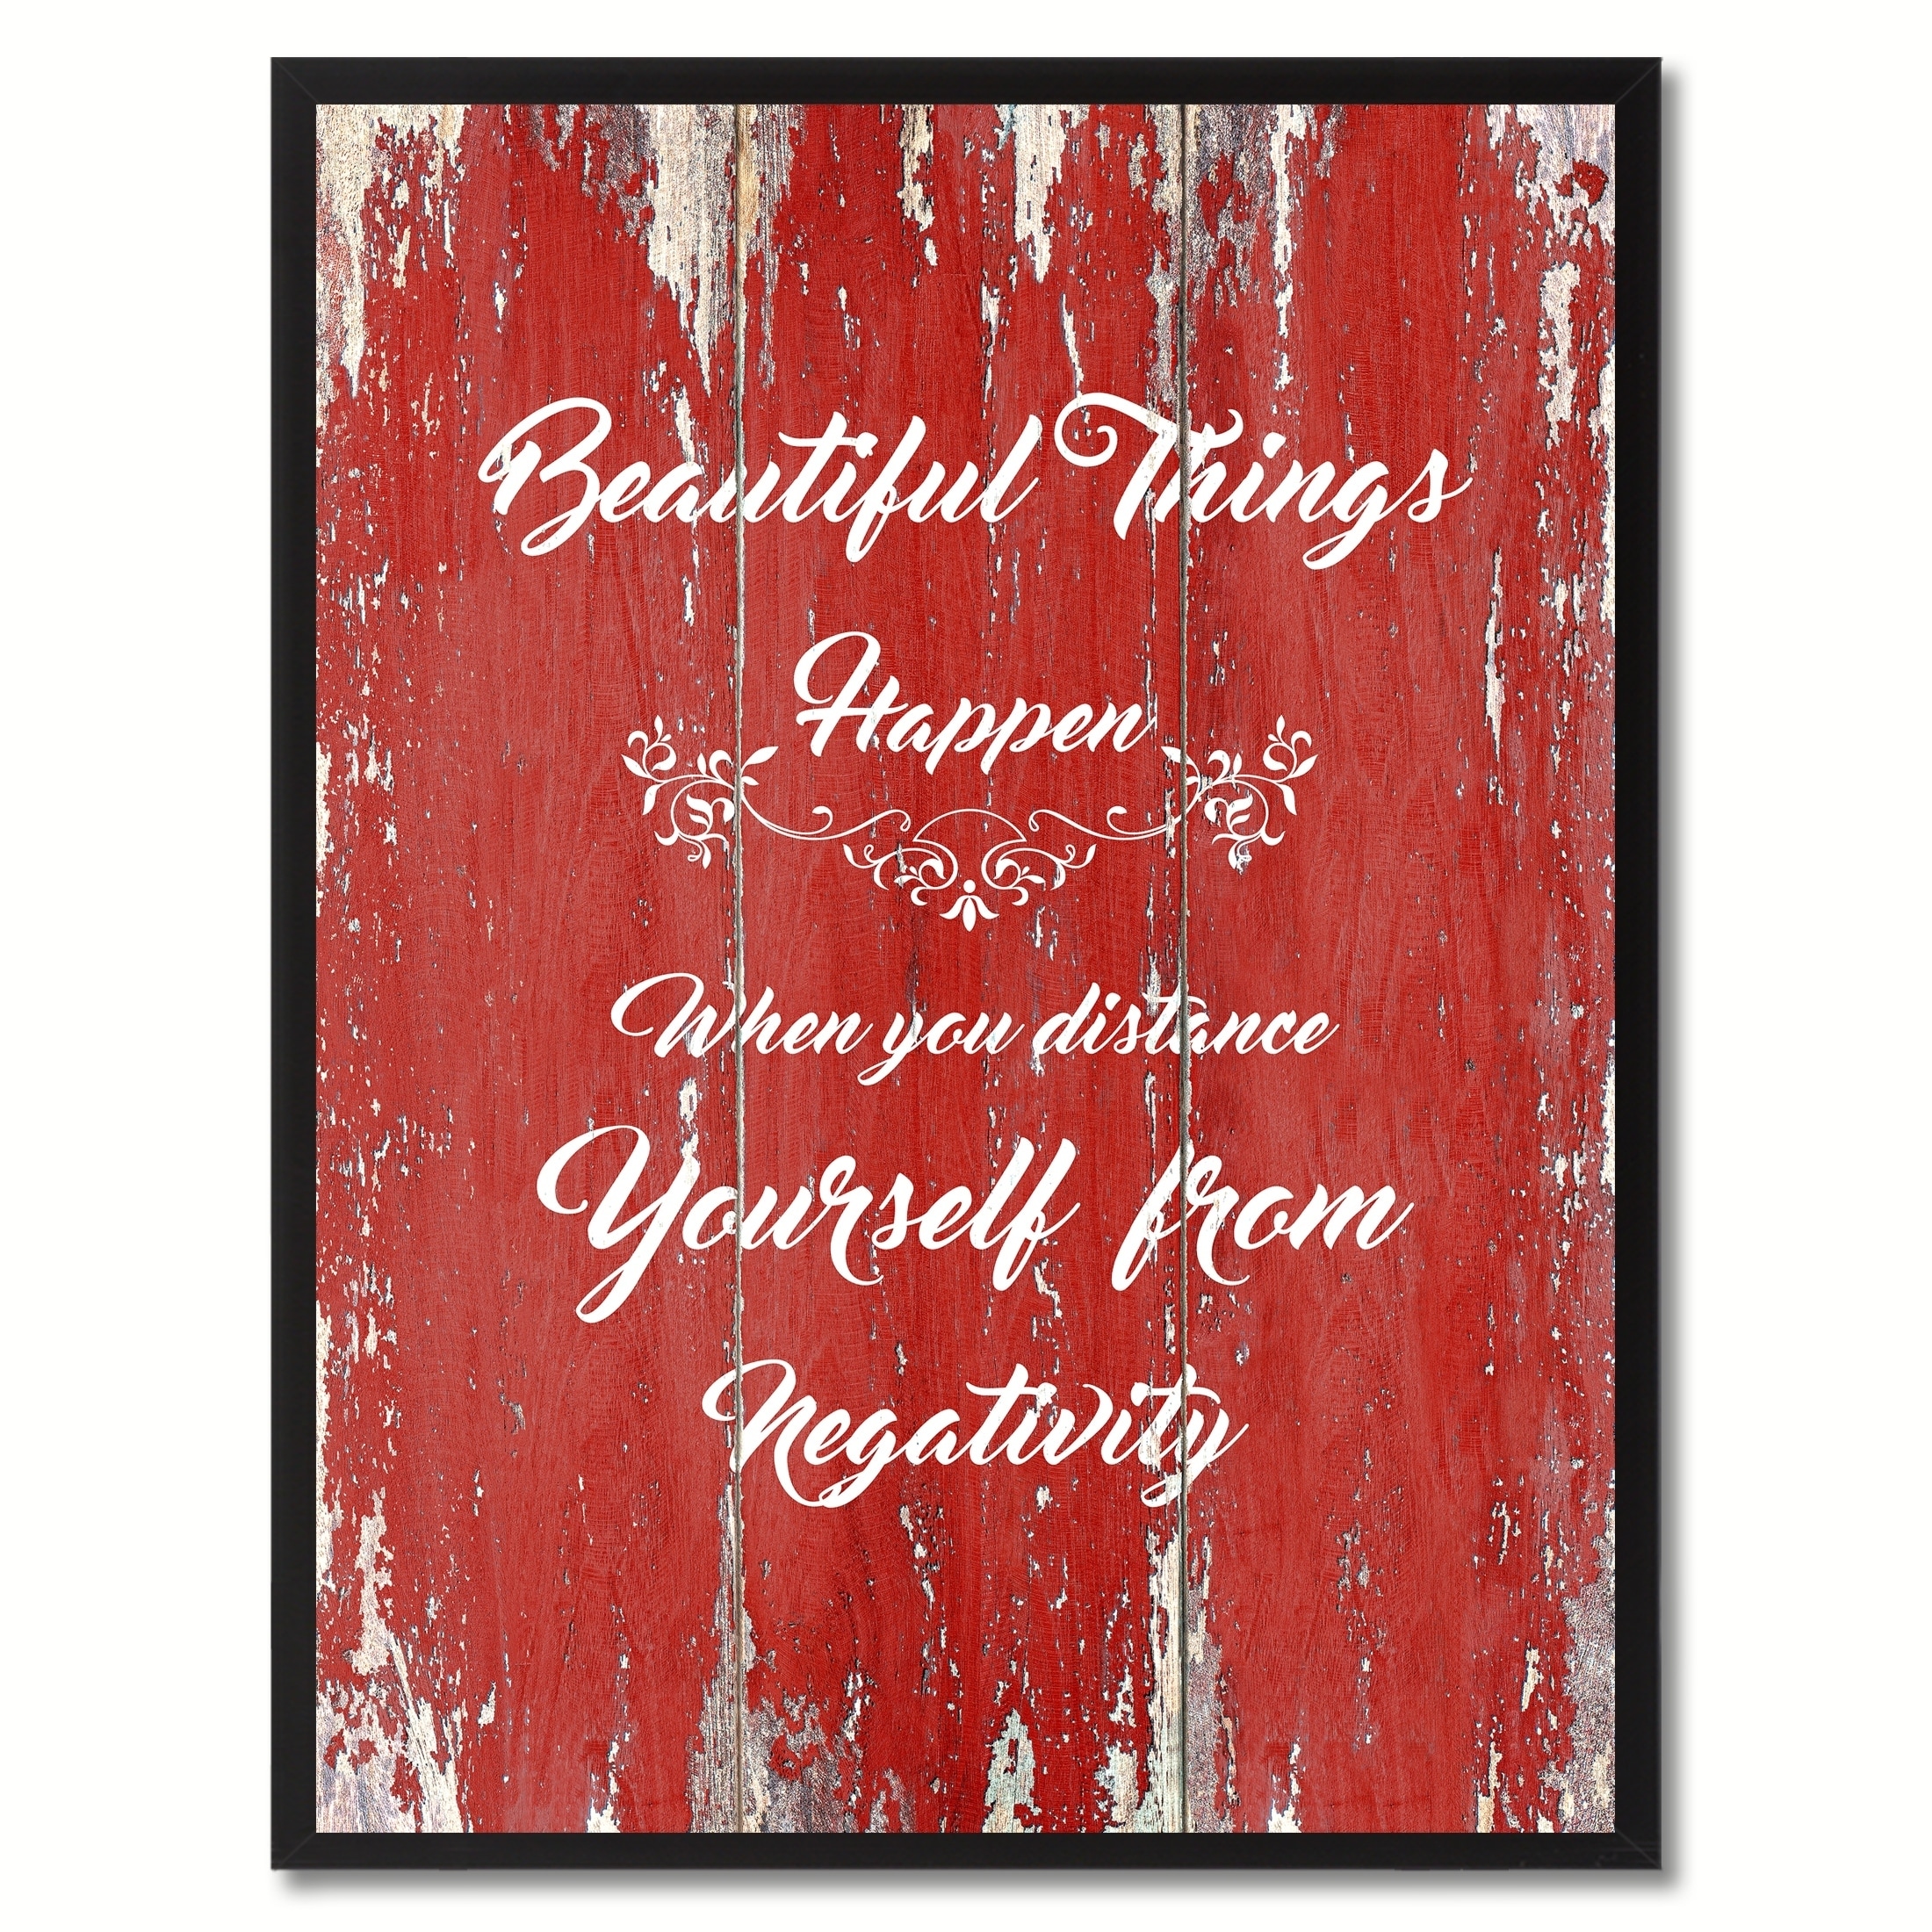 Beautiful Things Happen When You Distance Yourself From Negativity Motivation Saying Canvas Print Picture Frame Home Decor Art Overstock